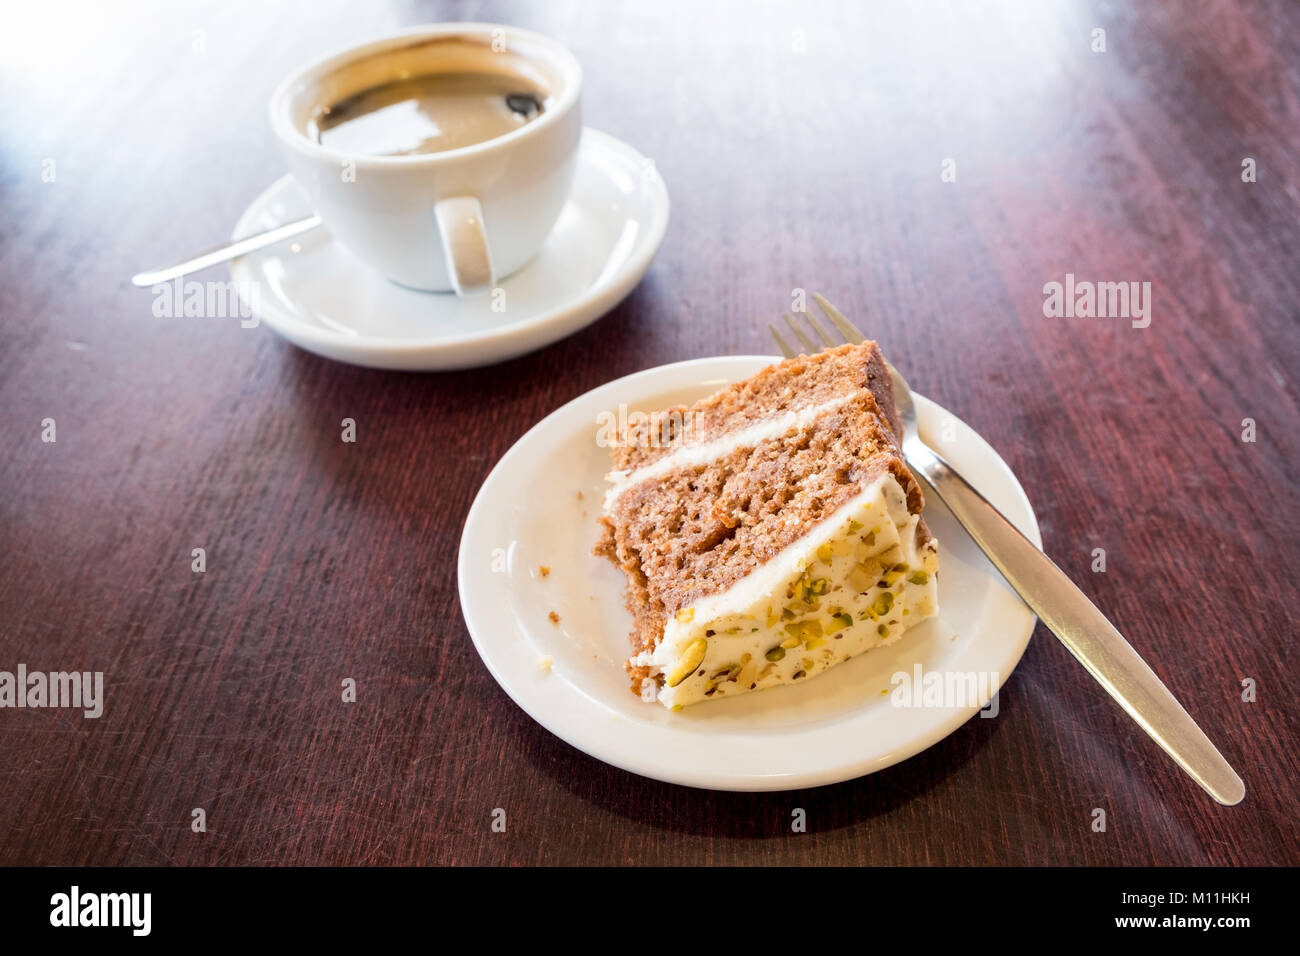 Black coffee and some partially eaten cake on a wooden table Stock Photo